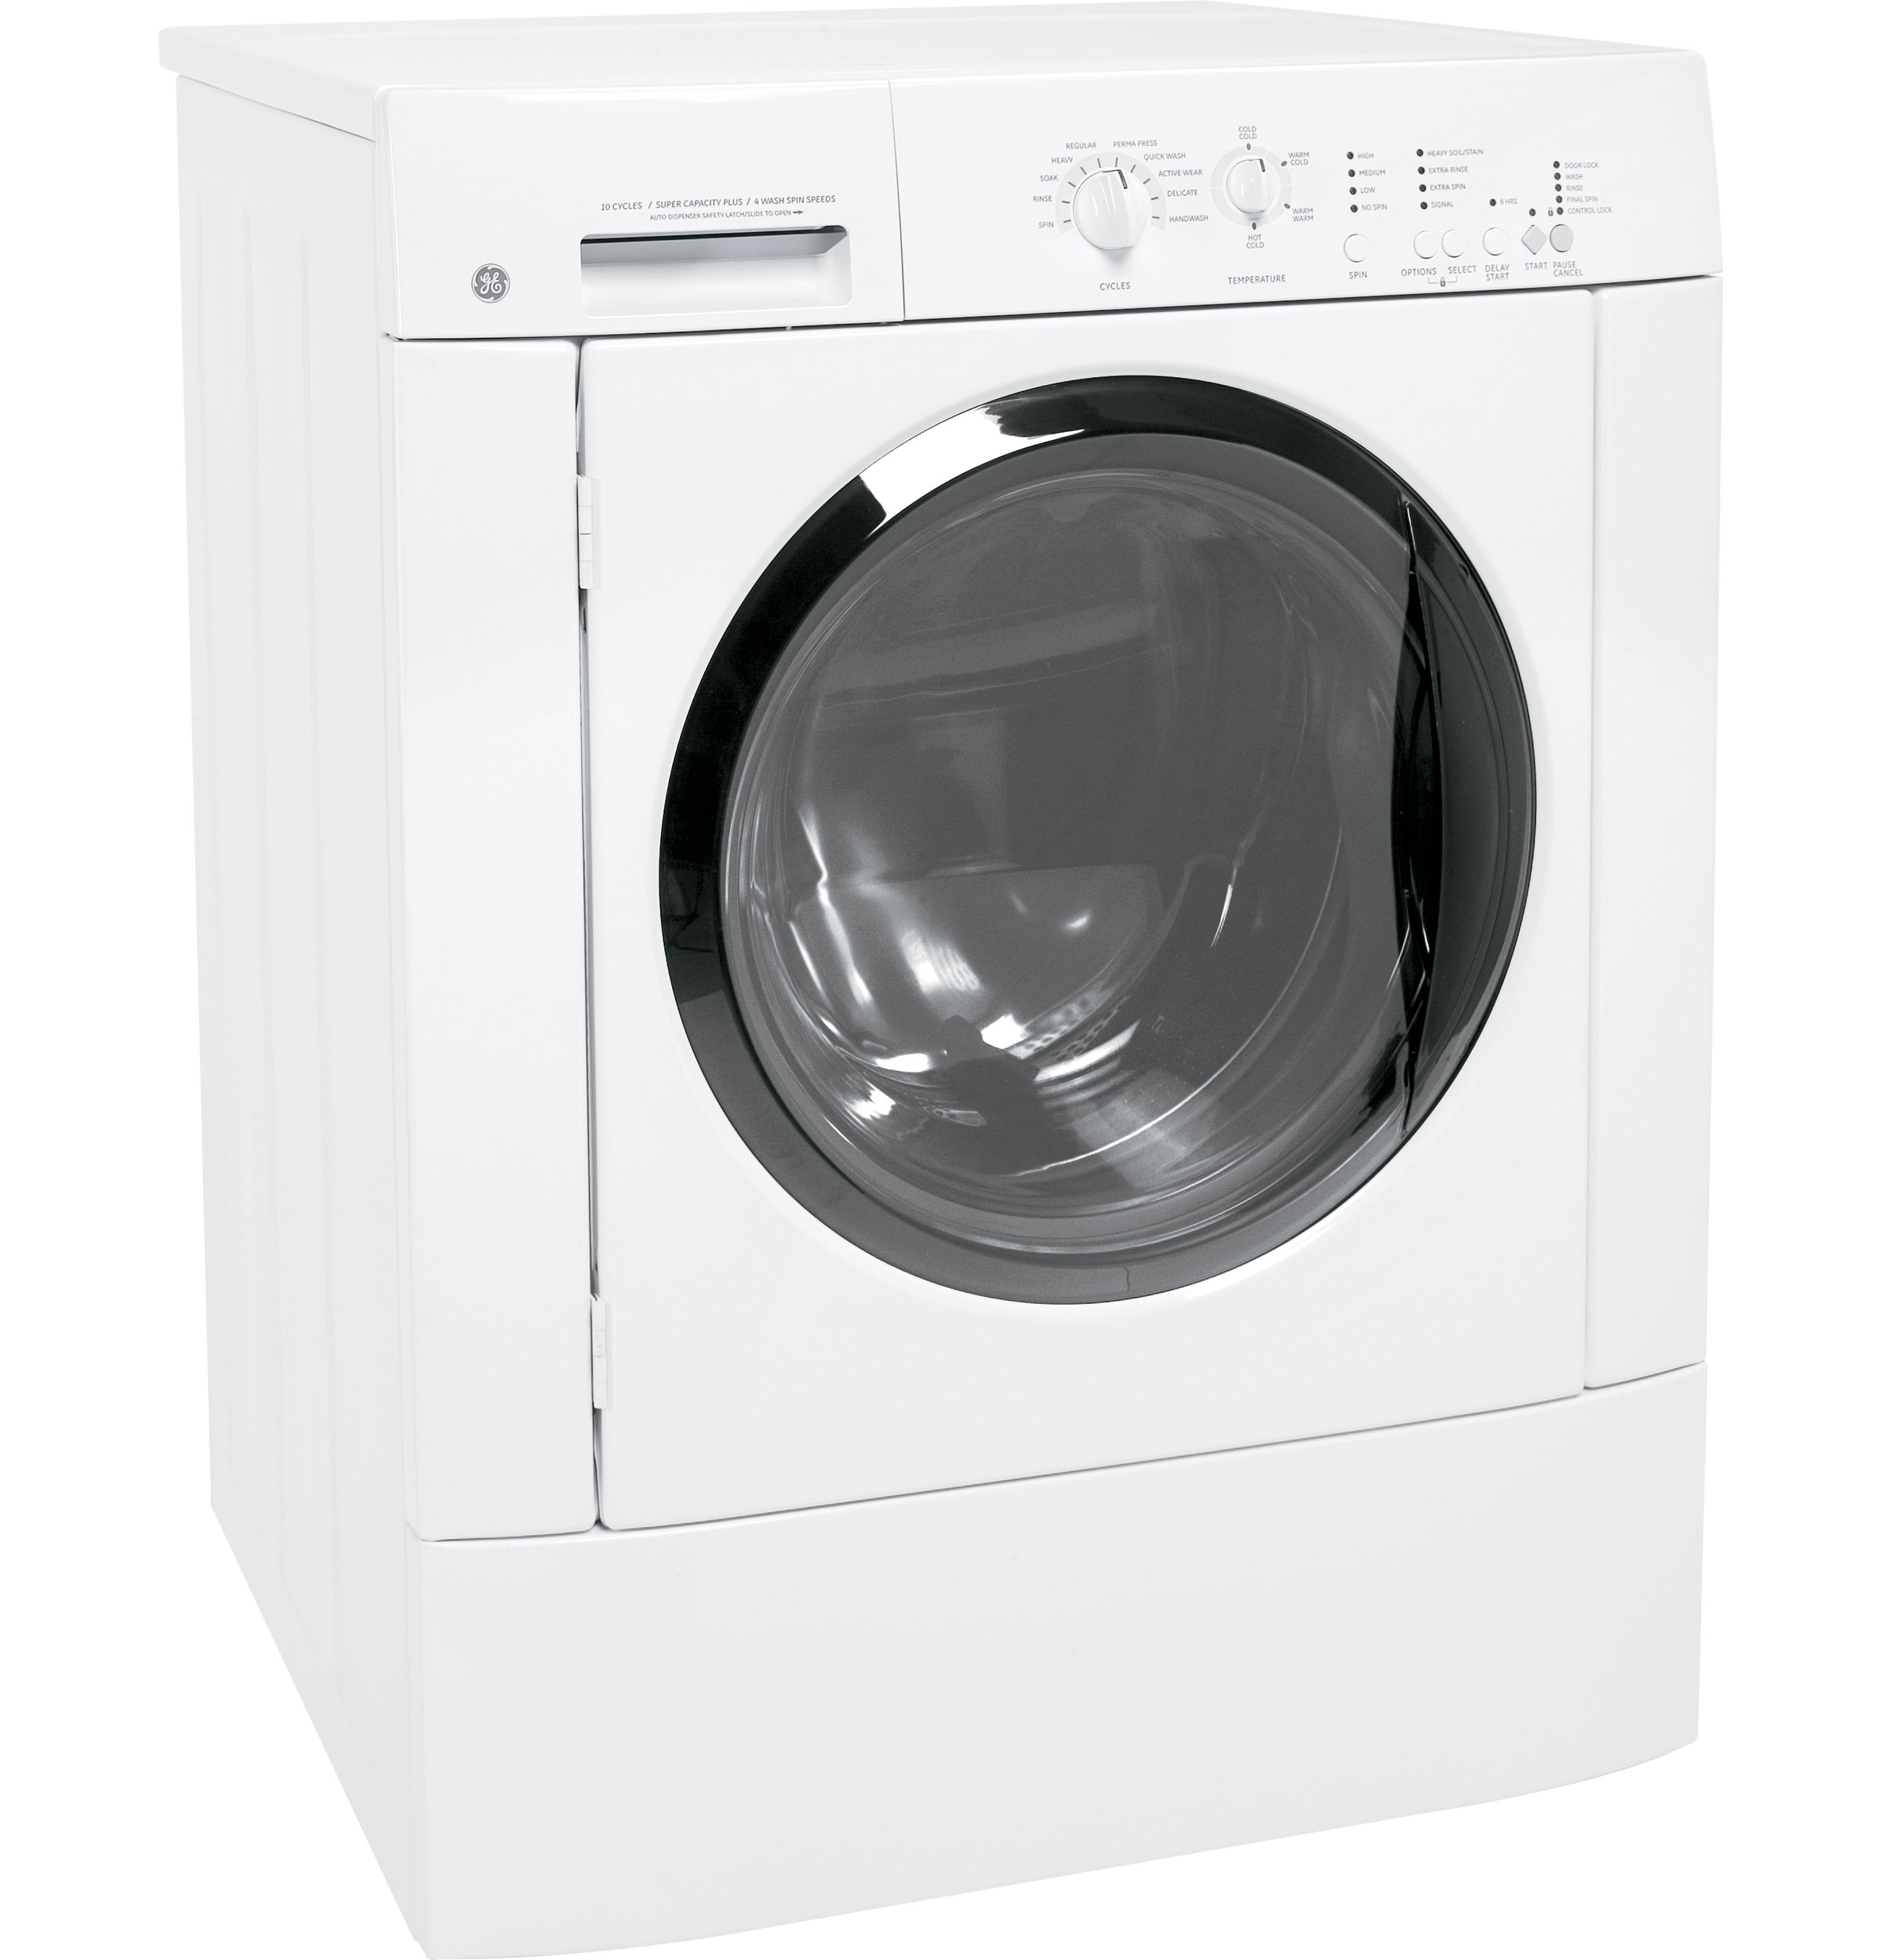 GE® 3.5 Cu. Ft. King-size Capacity Frontload Washer with Stainless Steel Basket